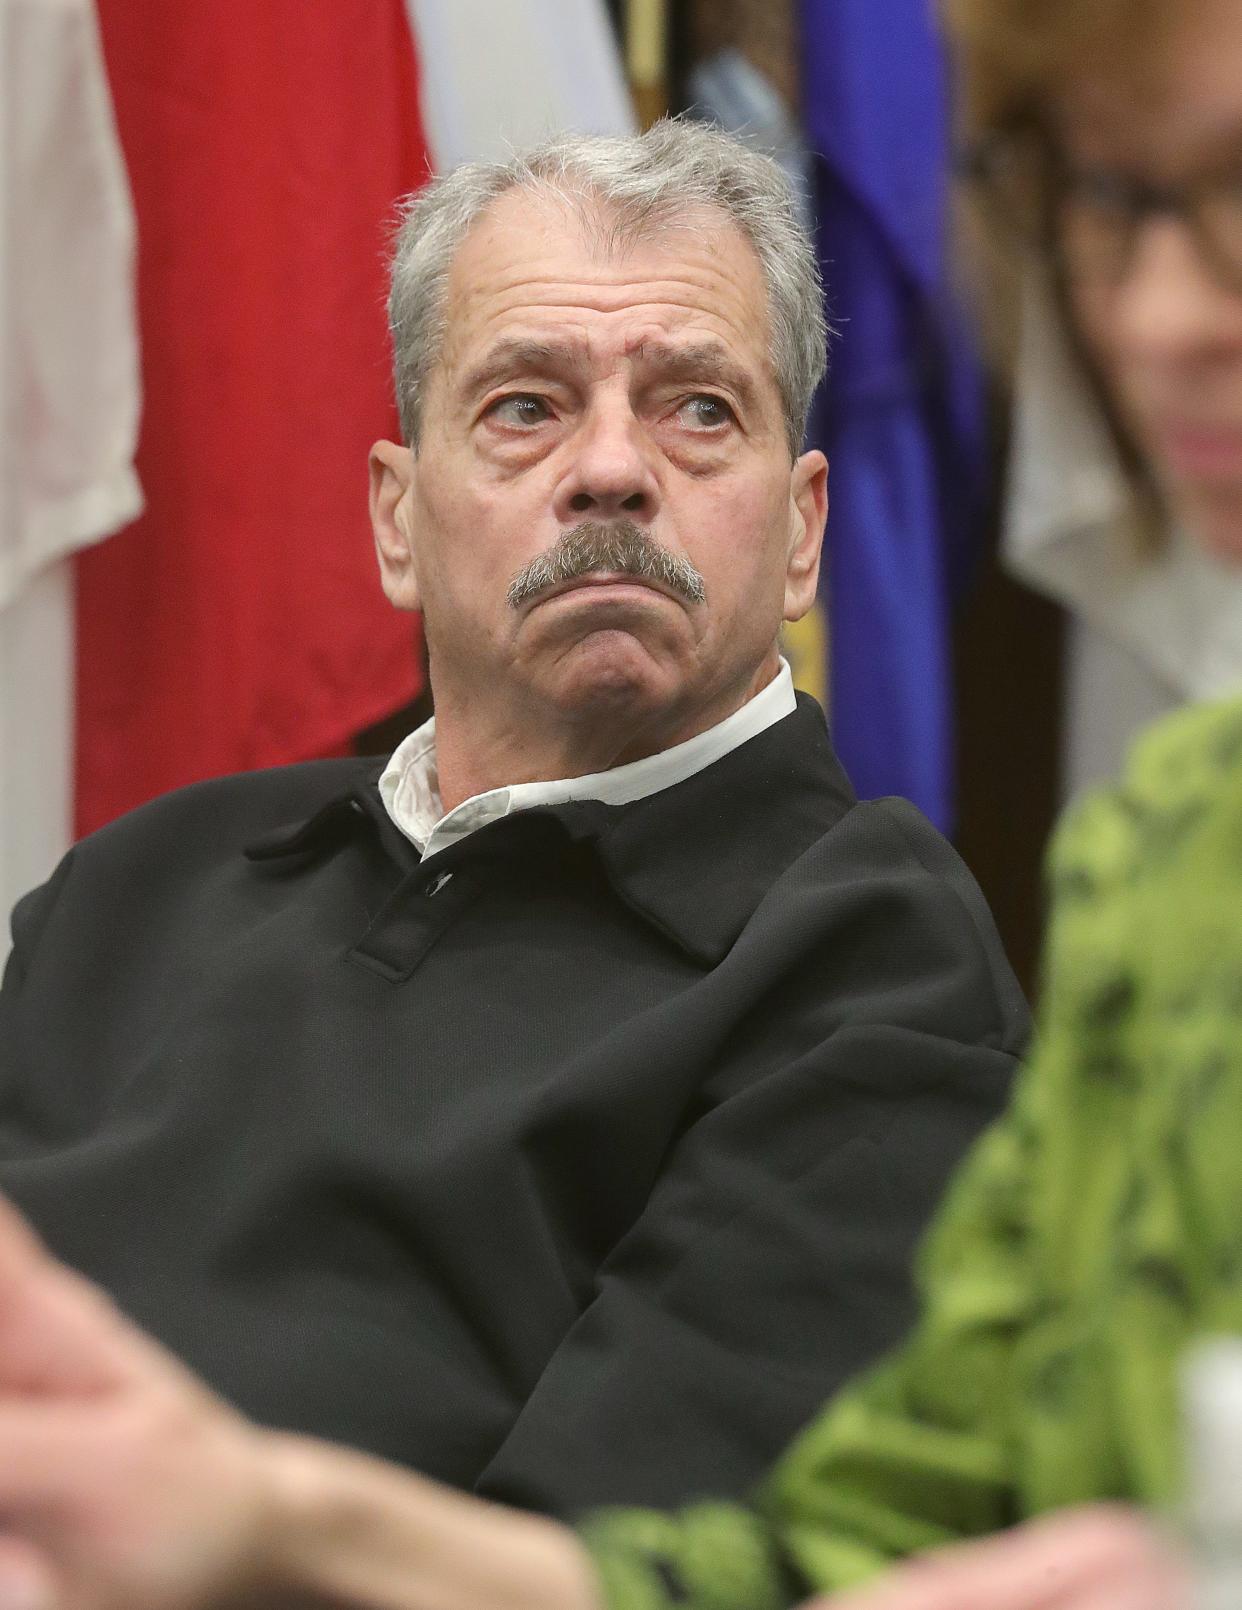 Former Public Utilities Commission of Ohio Chairman Sam Randazzo listens to a court hearing in Summit County.